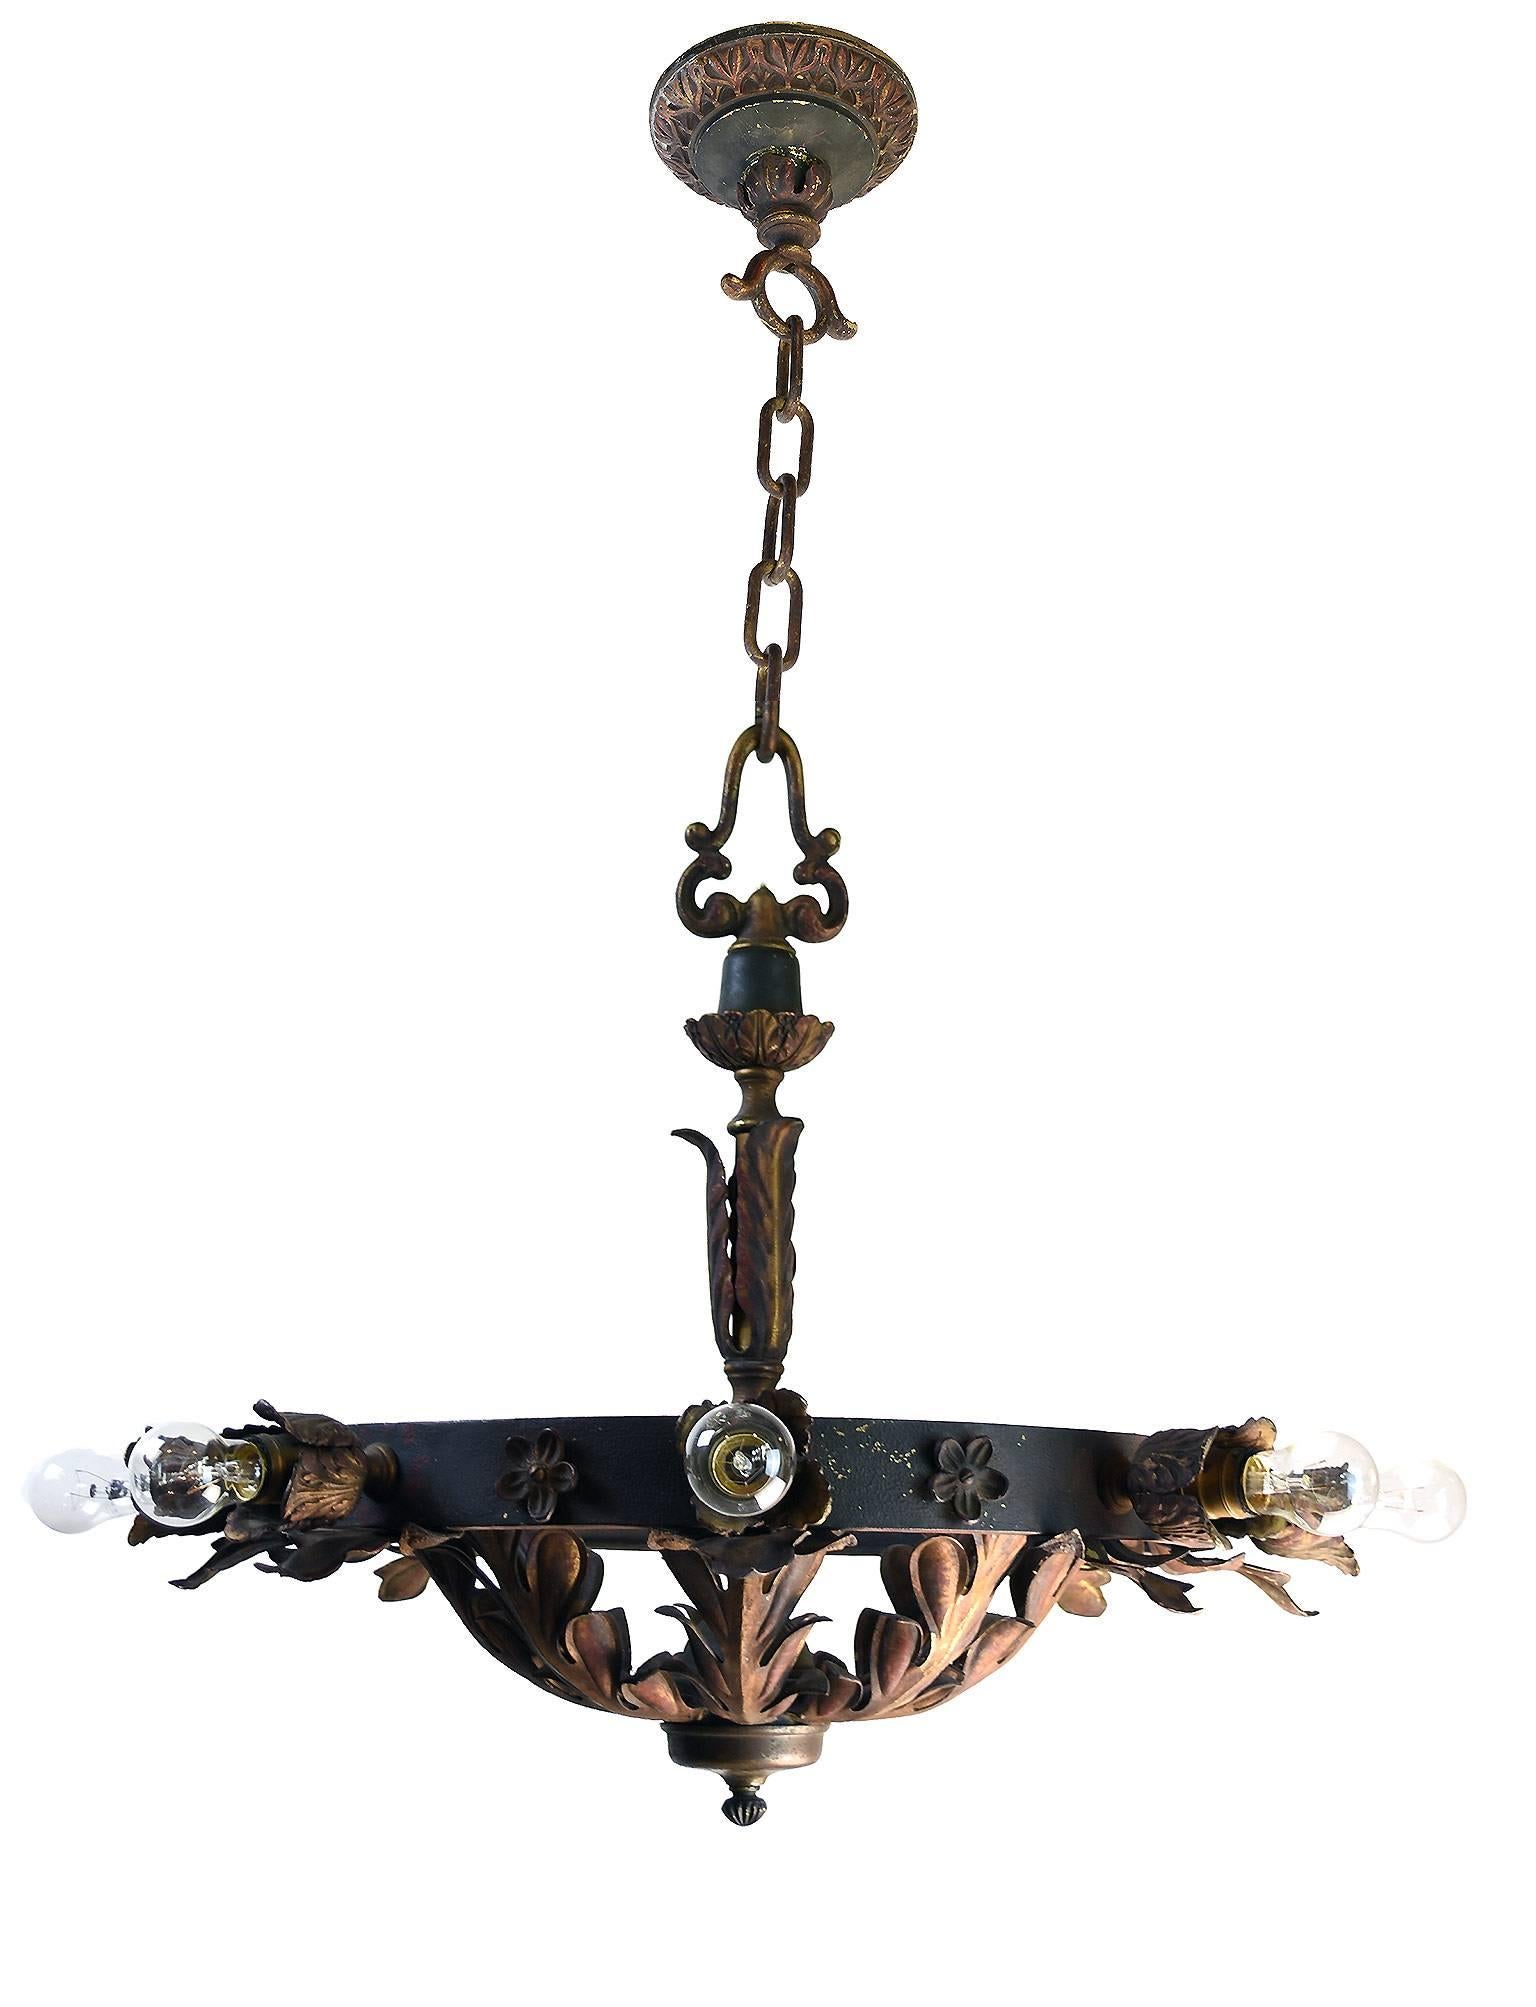 This great, over-sized fixture from the 1920s includes cast brass and iron organic ornamentation that creates wonderful contrast in color and texture. The fixture has 8 standard Edison sockets and is originally from a Masonic Lodge in Southern